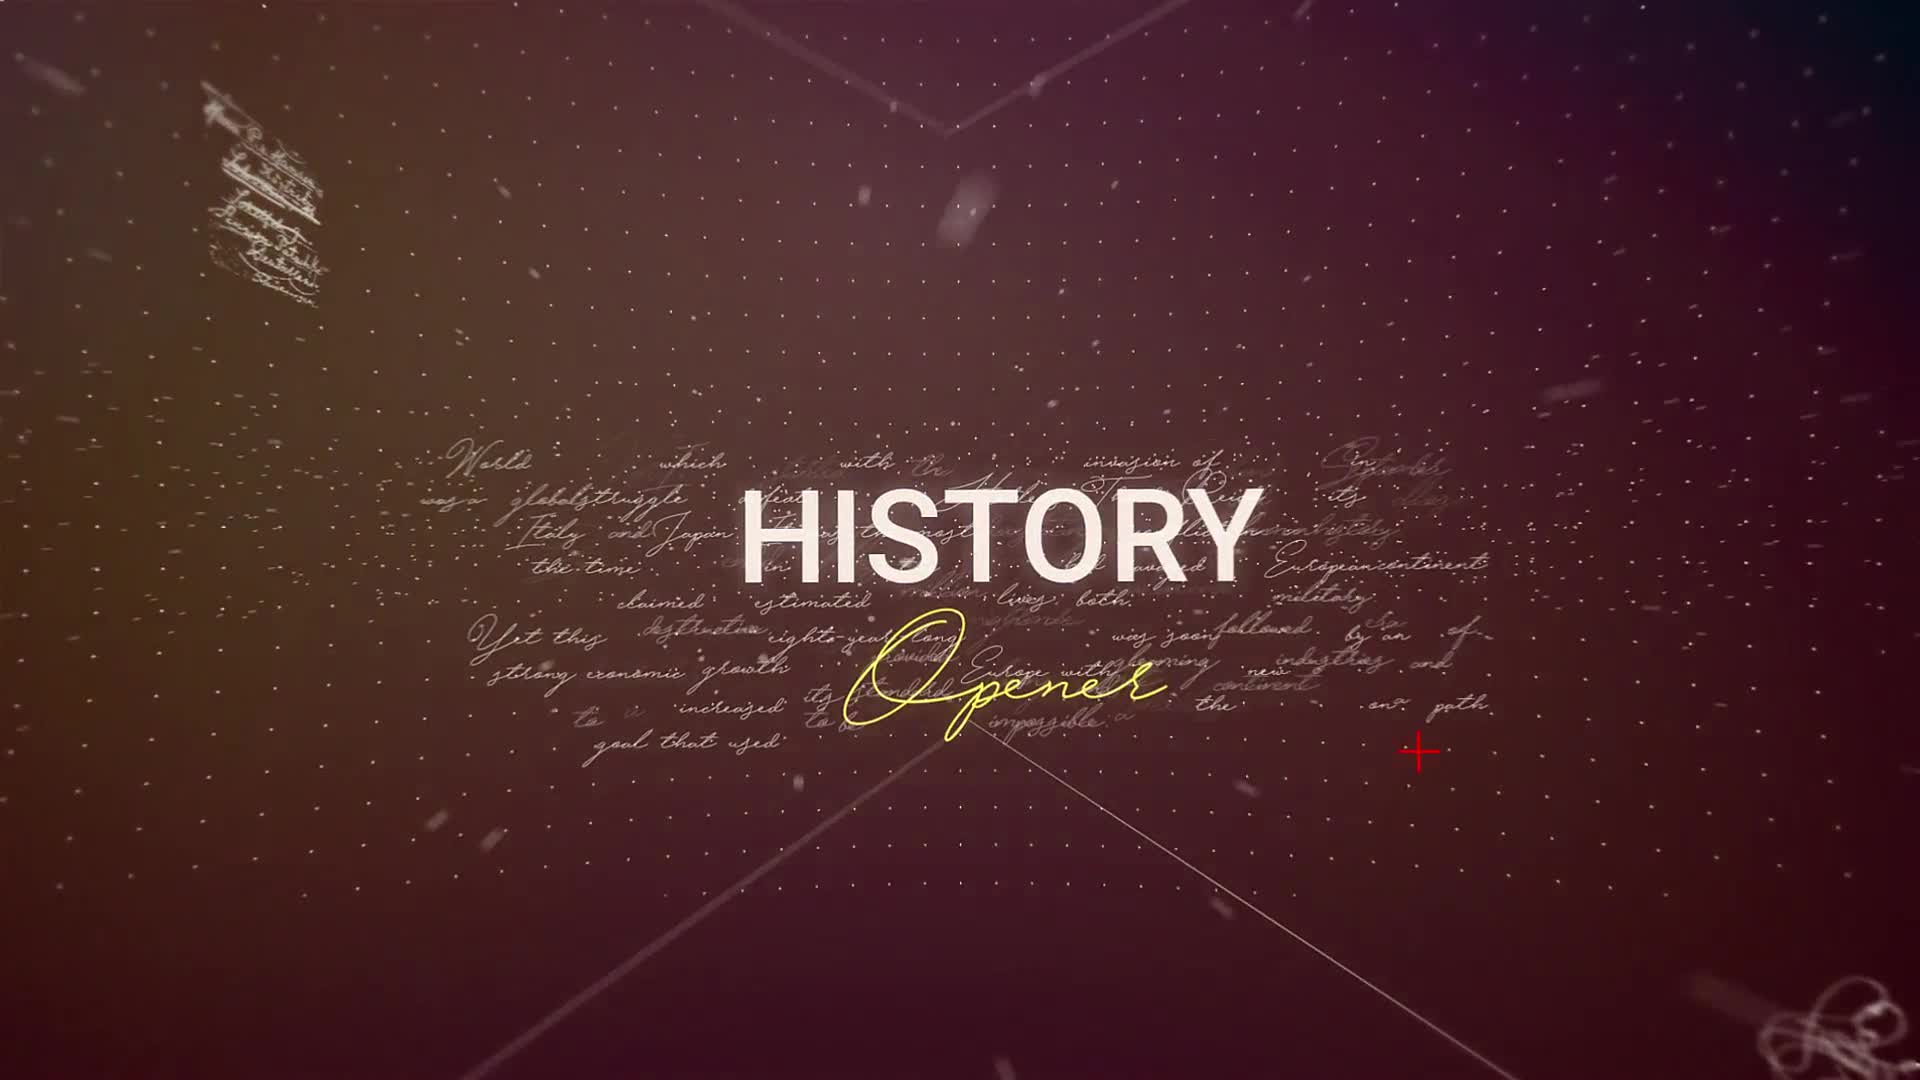 after effects template history timeline opener free download